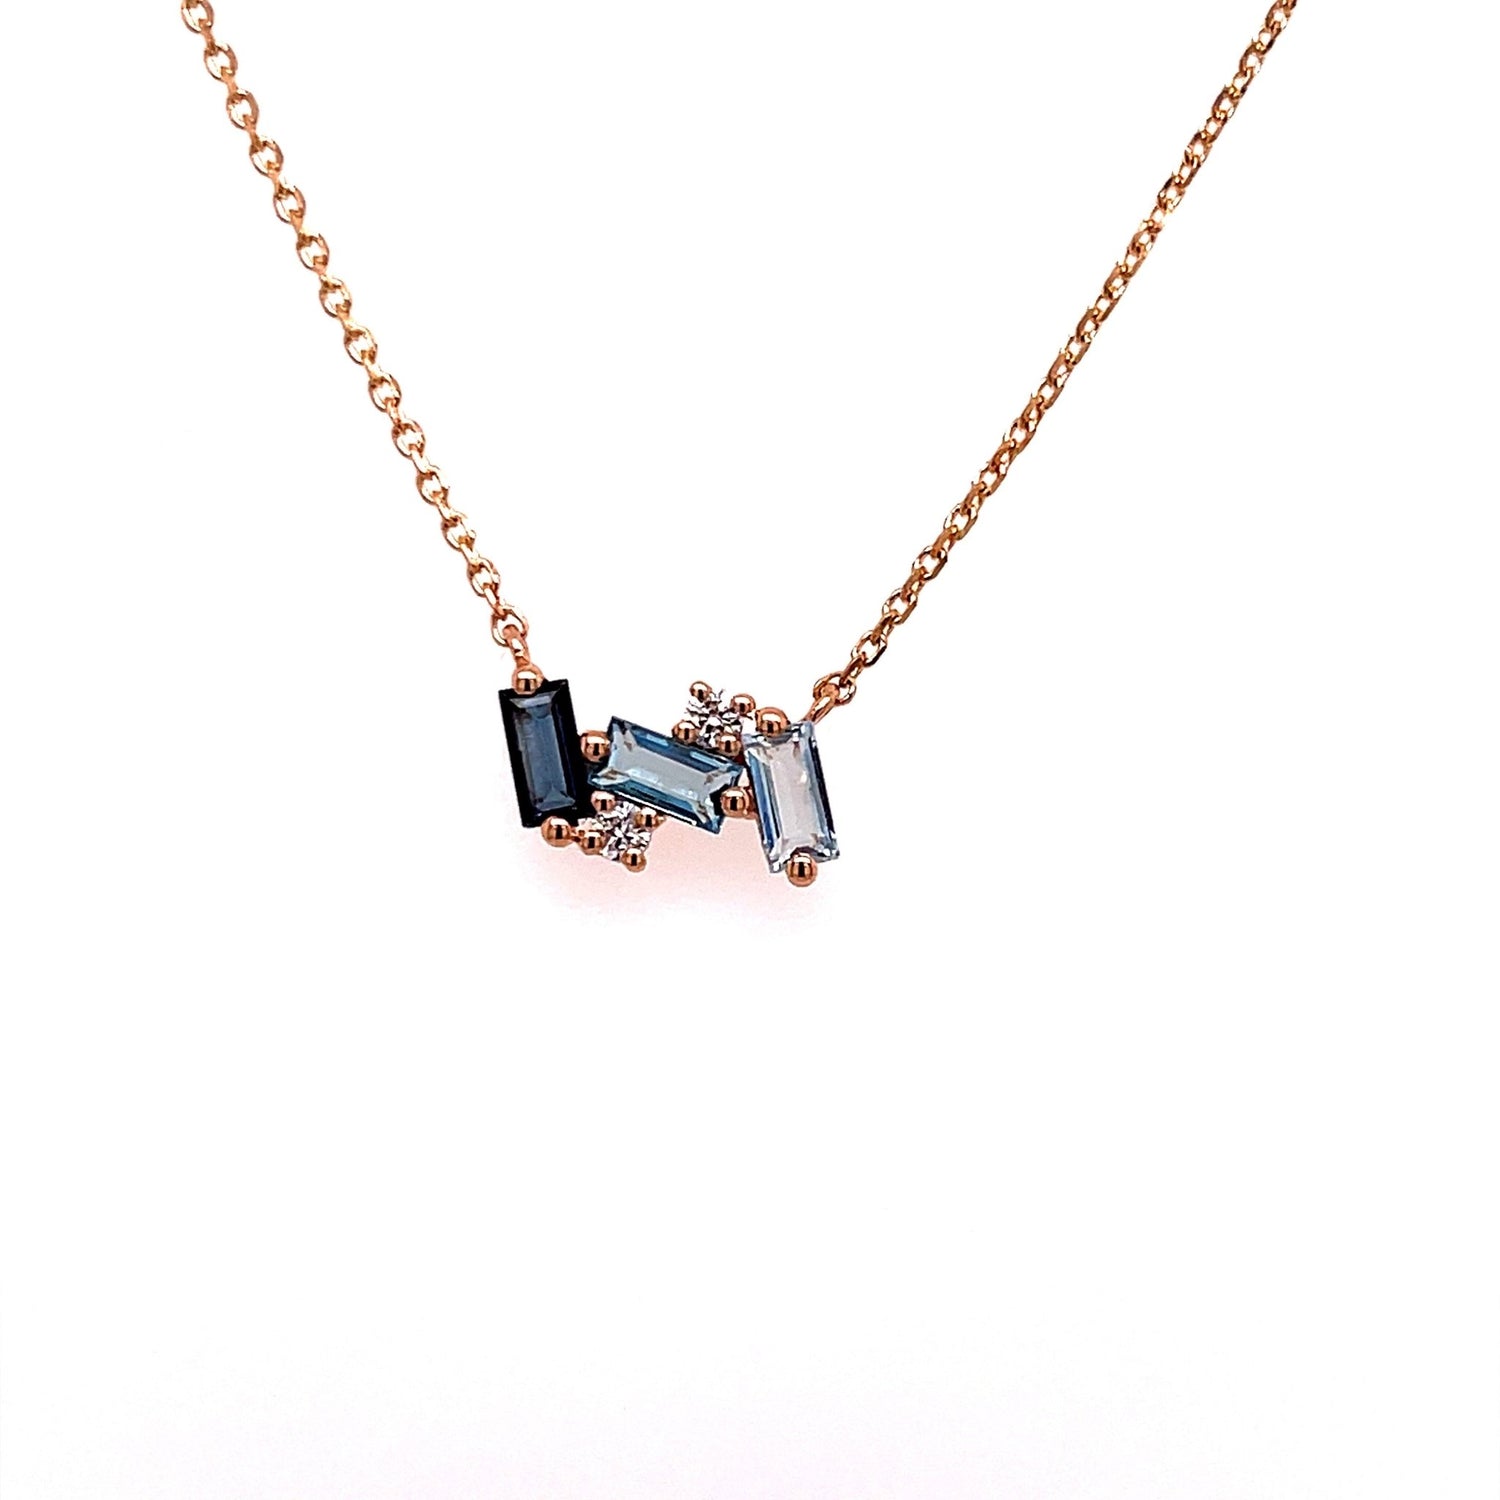 Mini Baguette Bar Necklace - Agave in Bloom